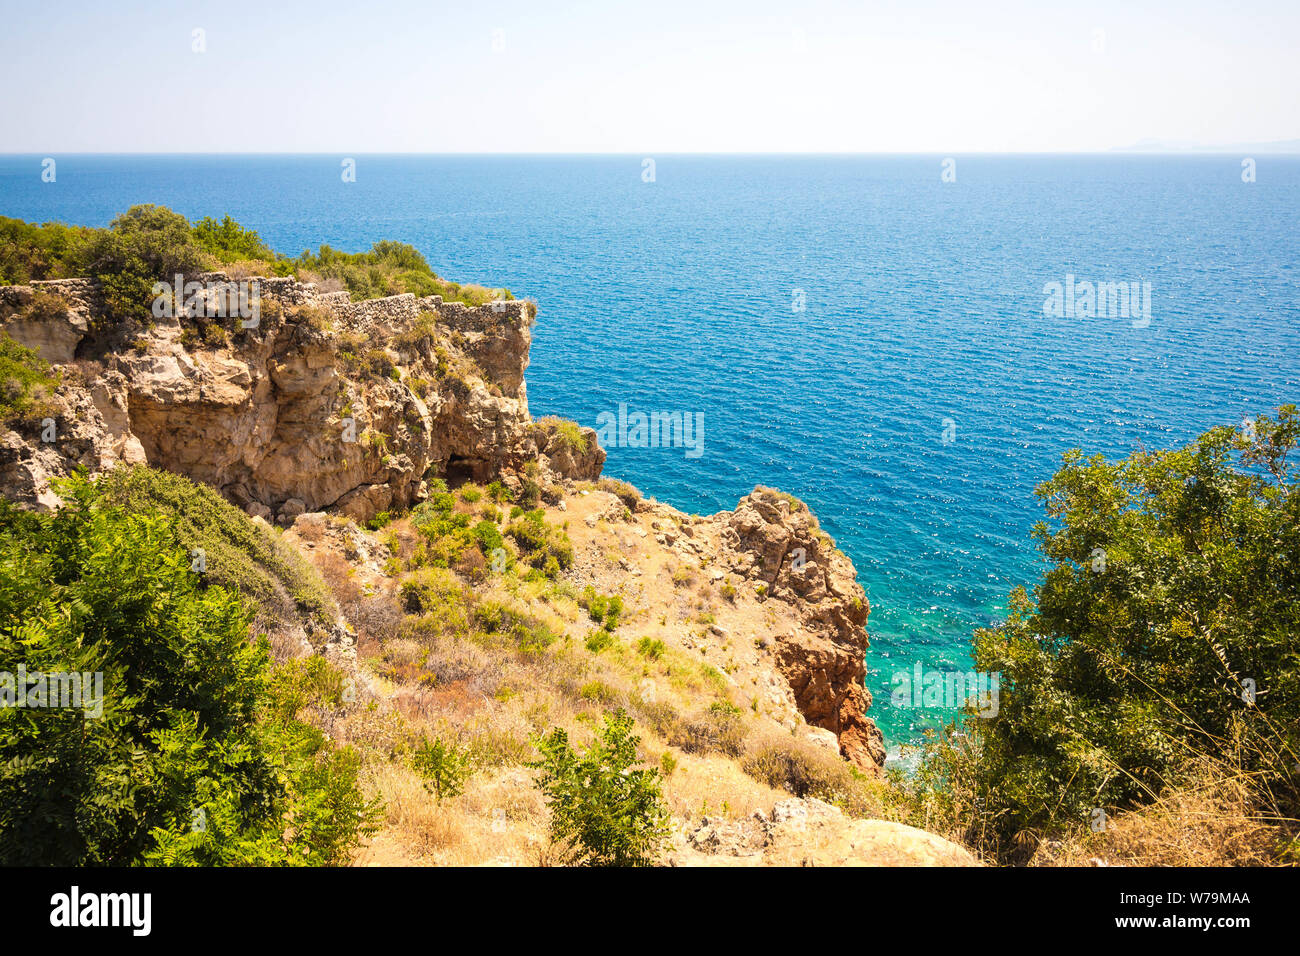 Beautiful view from the cliff of the sea. The water is clear with a blue tint. Bushes and various vegetation grow on the rock. Stock Photo